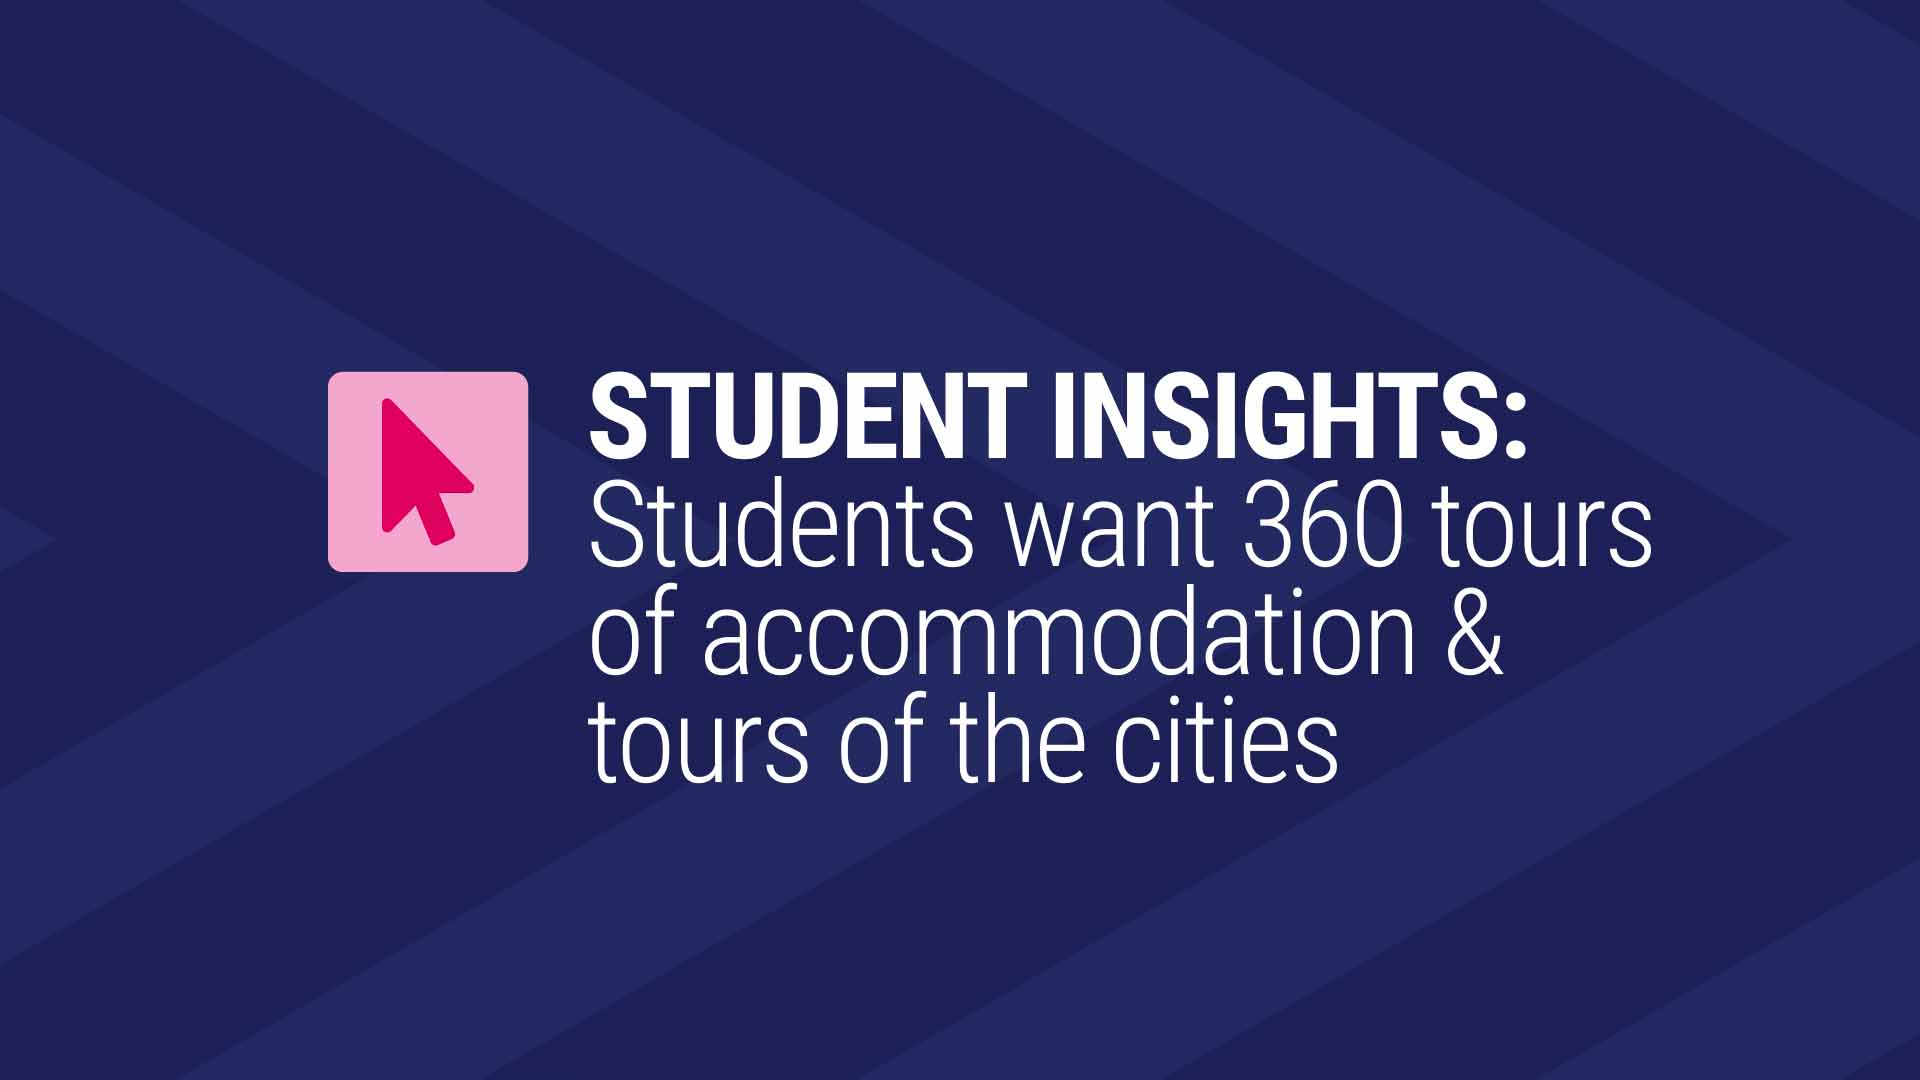 Card image for "23 - Student Insights: Students Want 360 Tours"